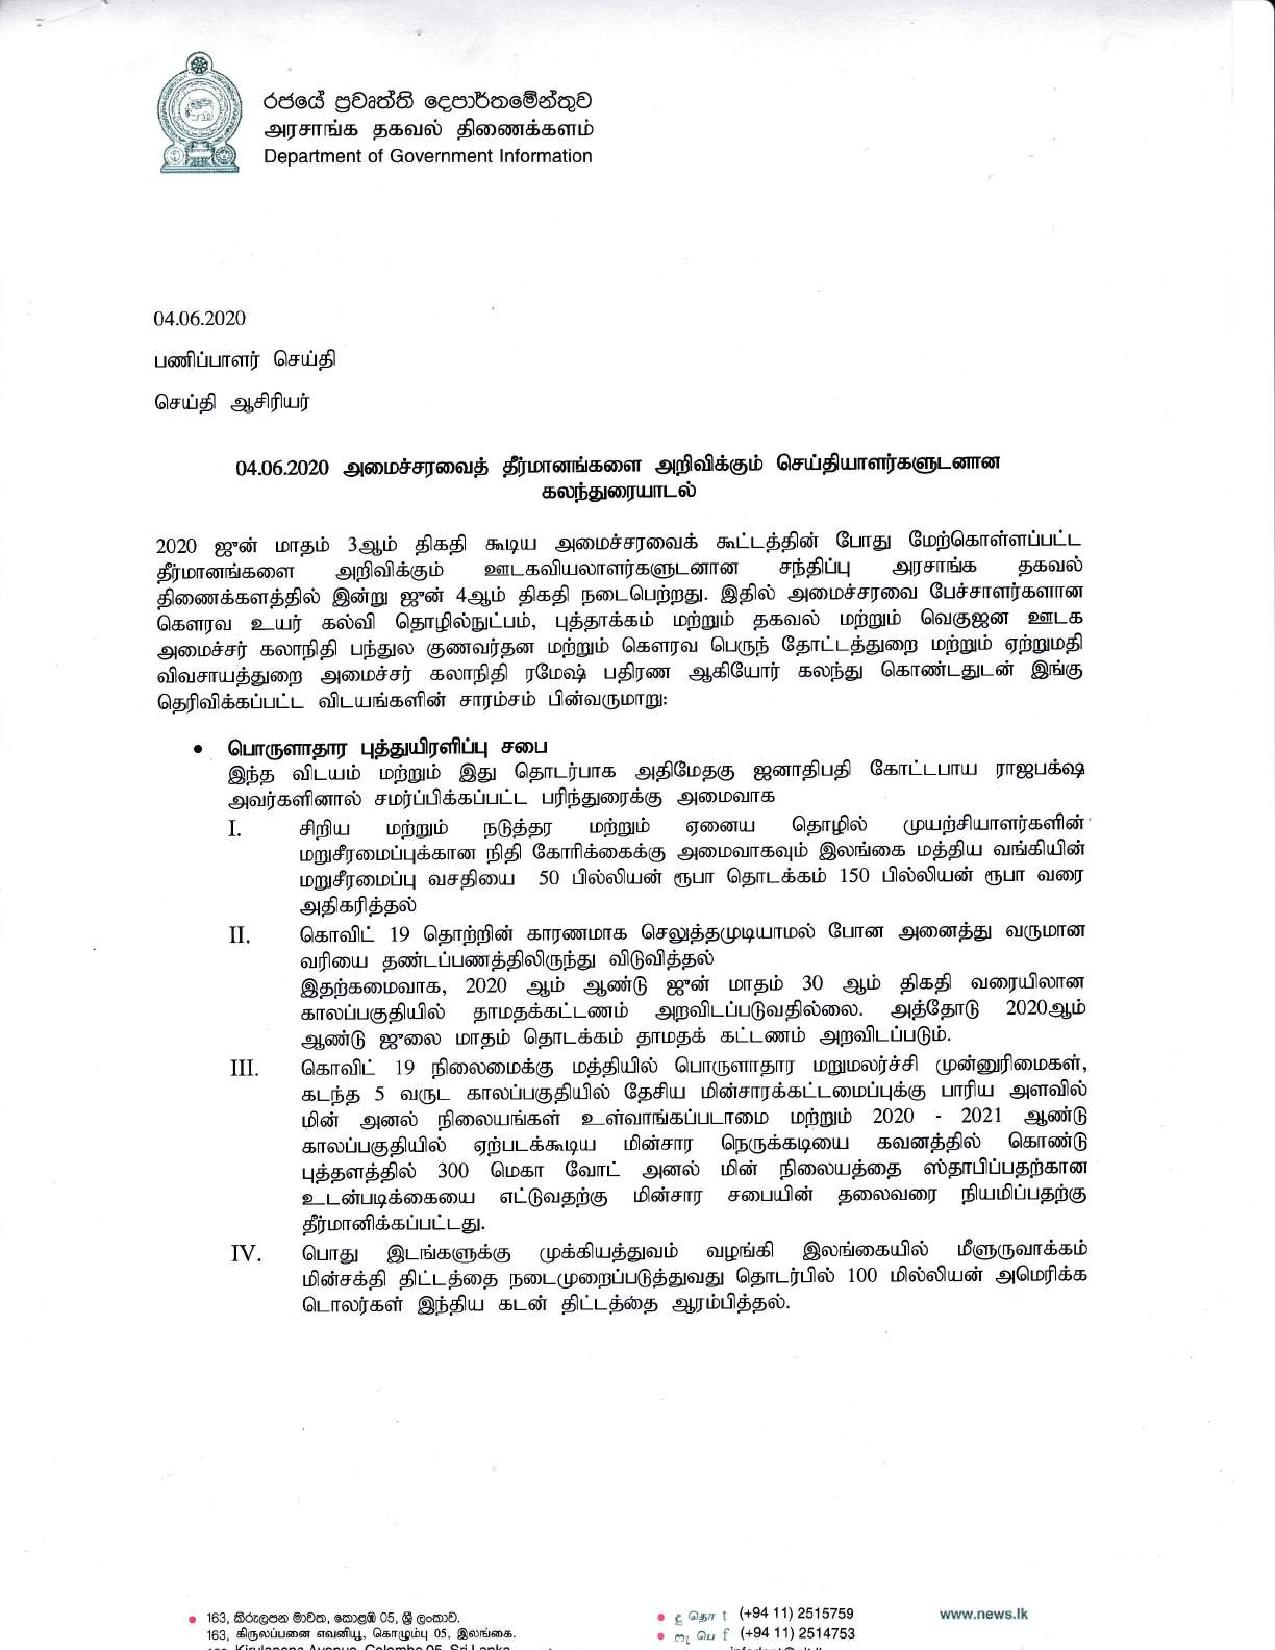 Cabinet Tamil compressed page 001